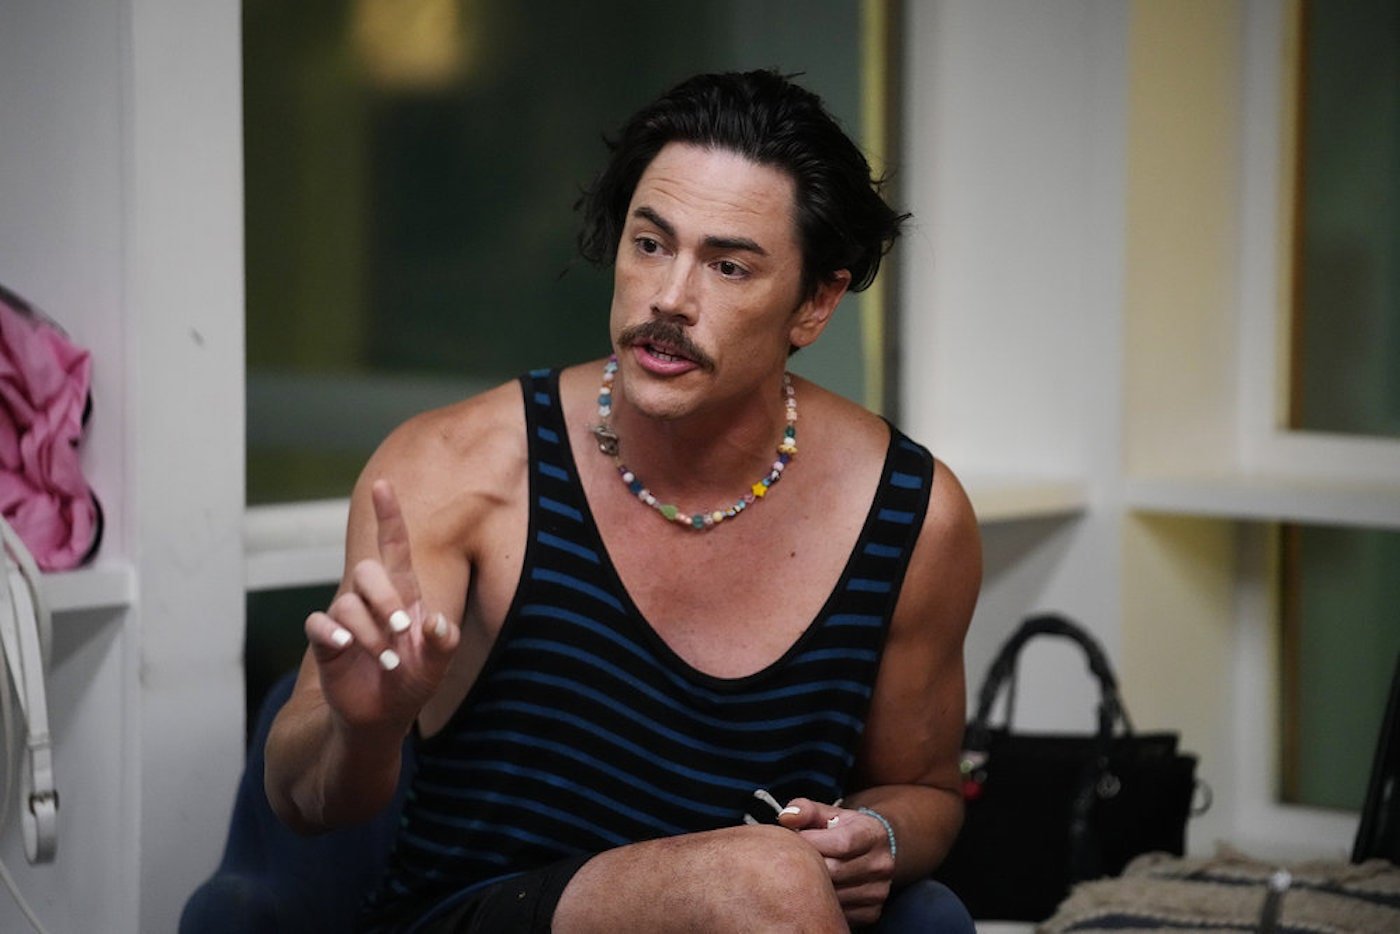 Tom Sandoval from 'Vanderpump Rules' holds a finger up while wearing a tank top